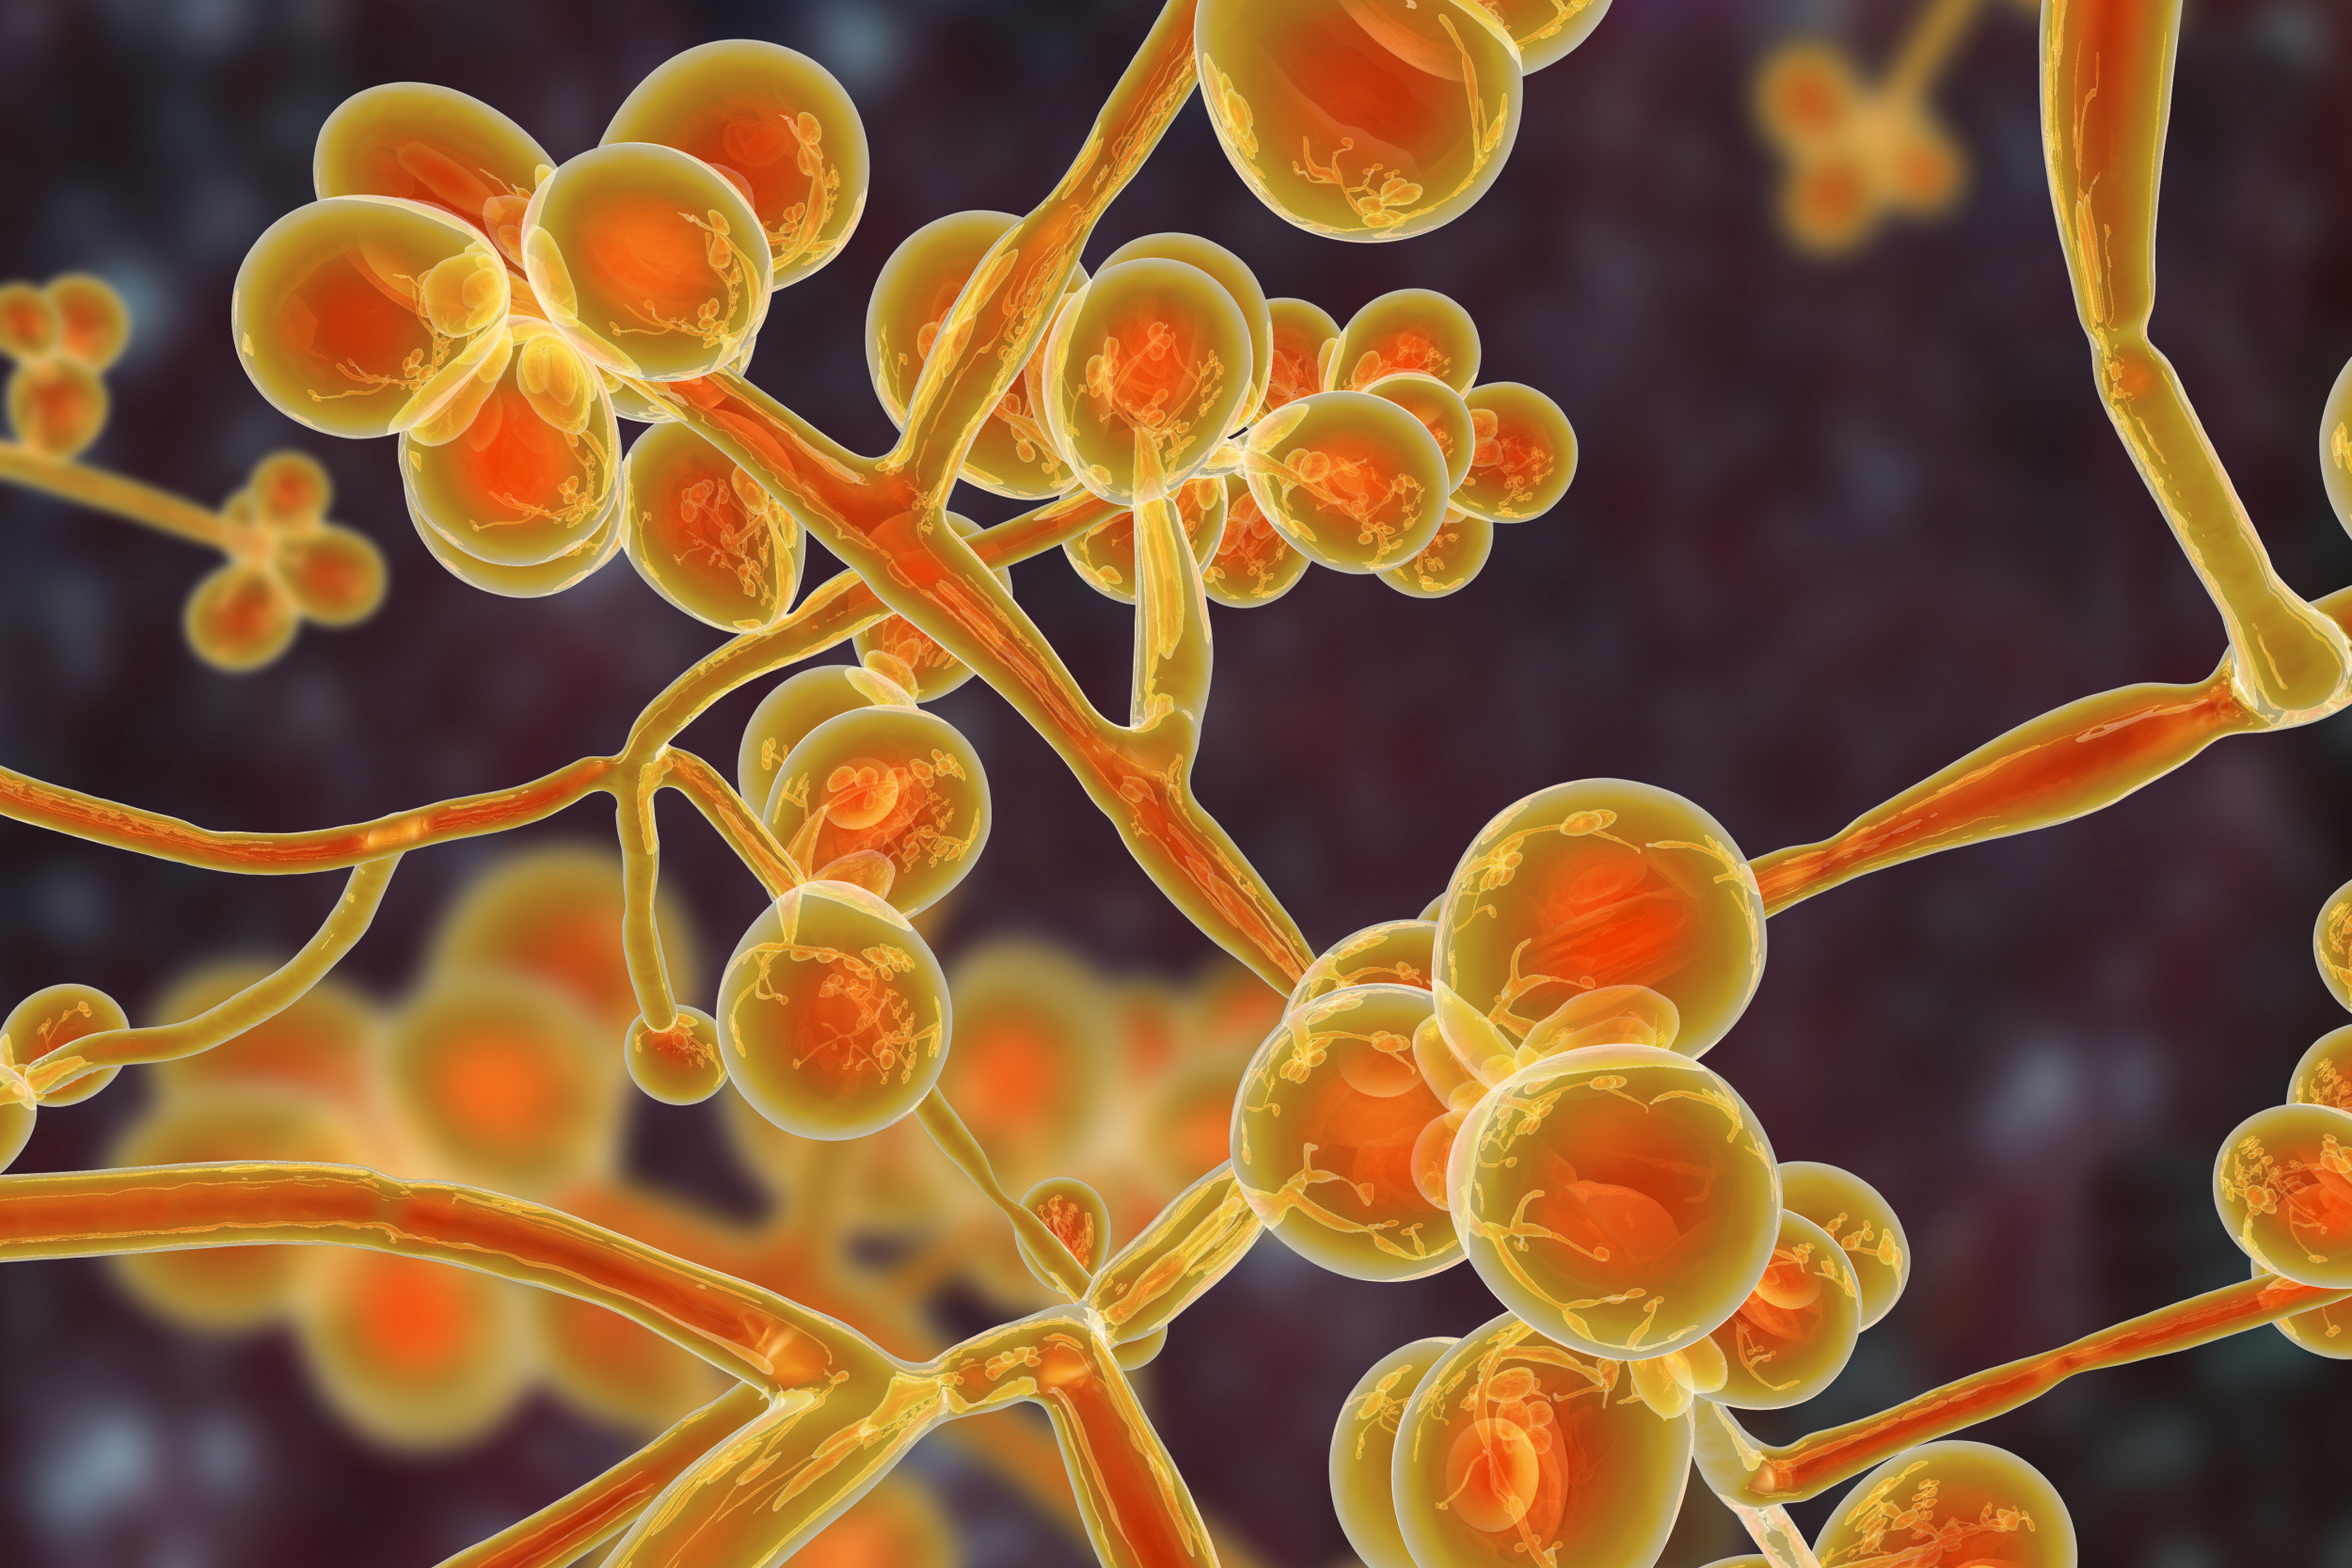 Scientists Who Studied Candida Auris Fungus Warn Global Warming May